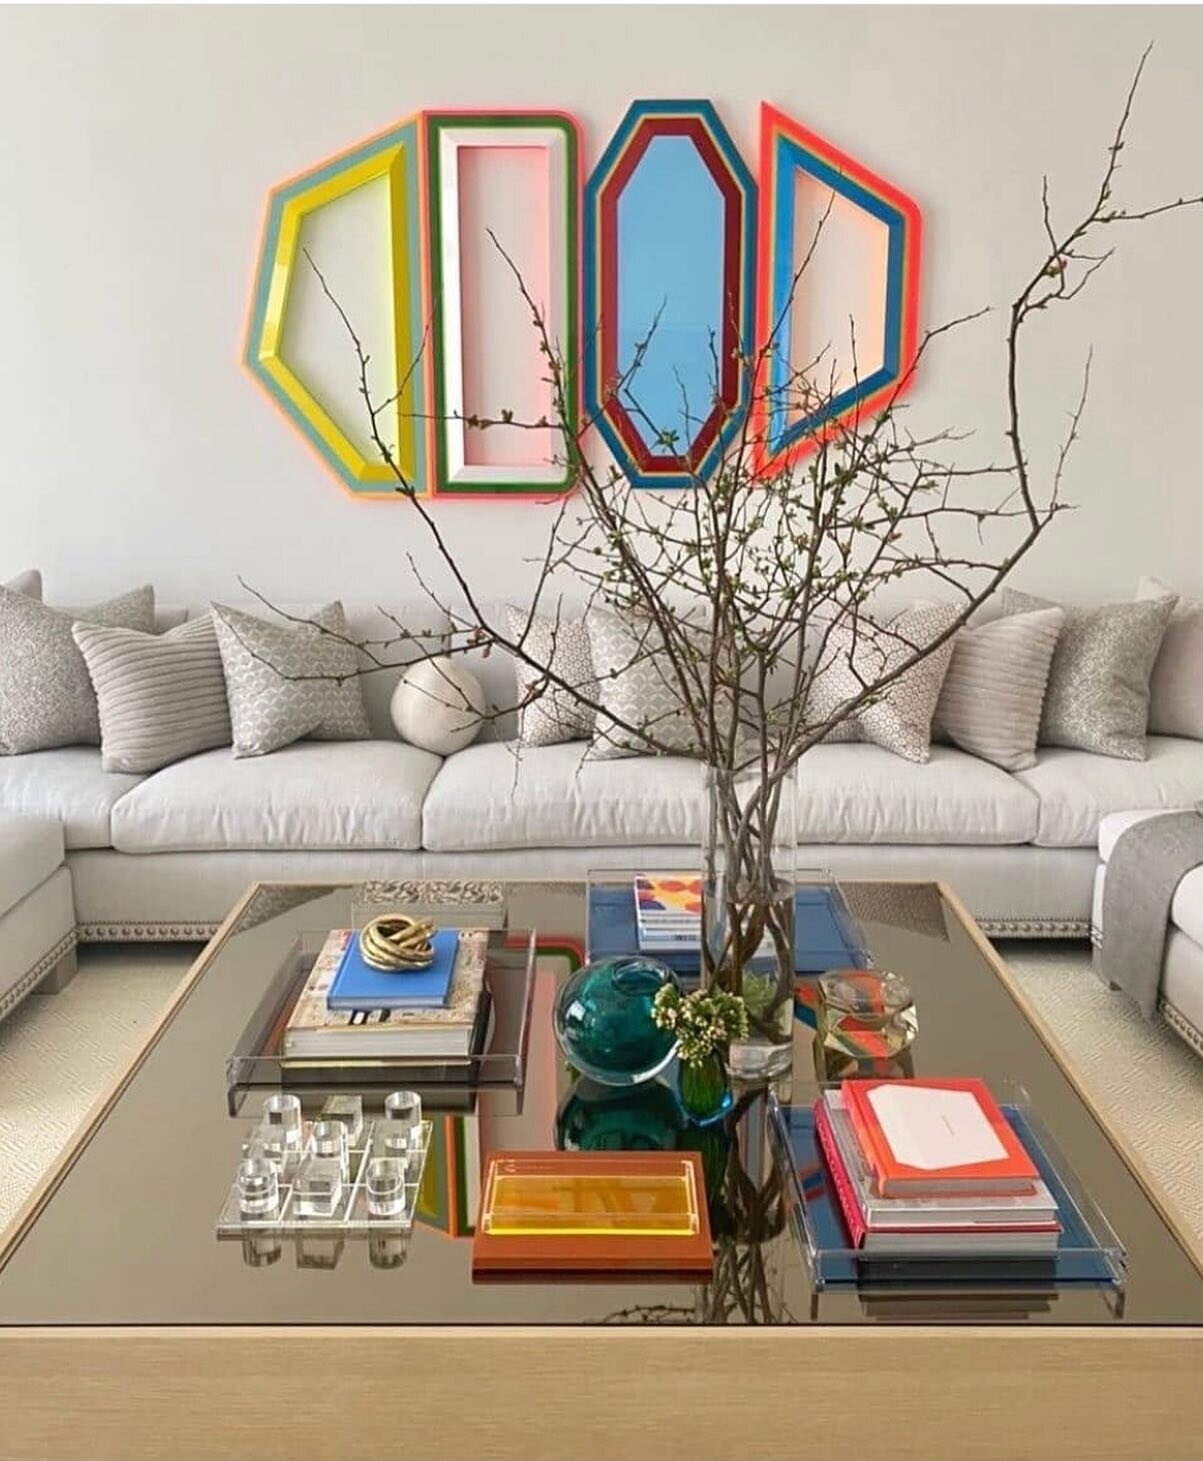 The abstract art by Beverly Fishman heightens the room with a colourful combination of geometric shapes echoing the coffee table layout as designed by Aman &amp; Meeks. ⁠
Via @amanmeeks⁠
#AmanMeeks #BeverlyFishman #GeometricArt #AbstractArt #CoffeeTa